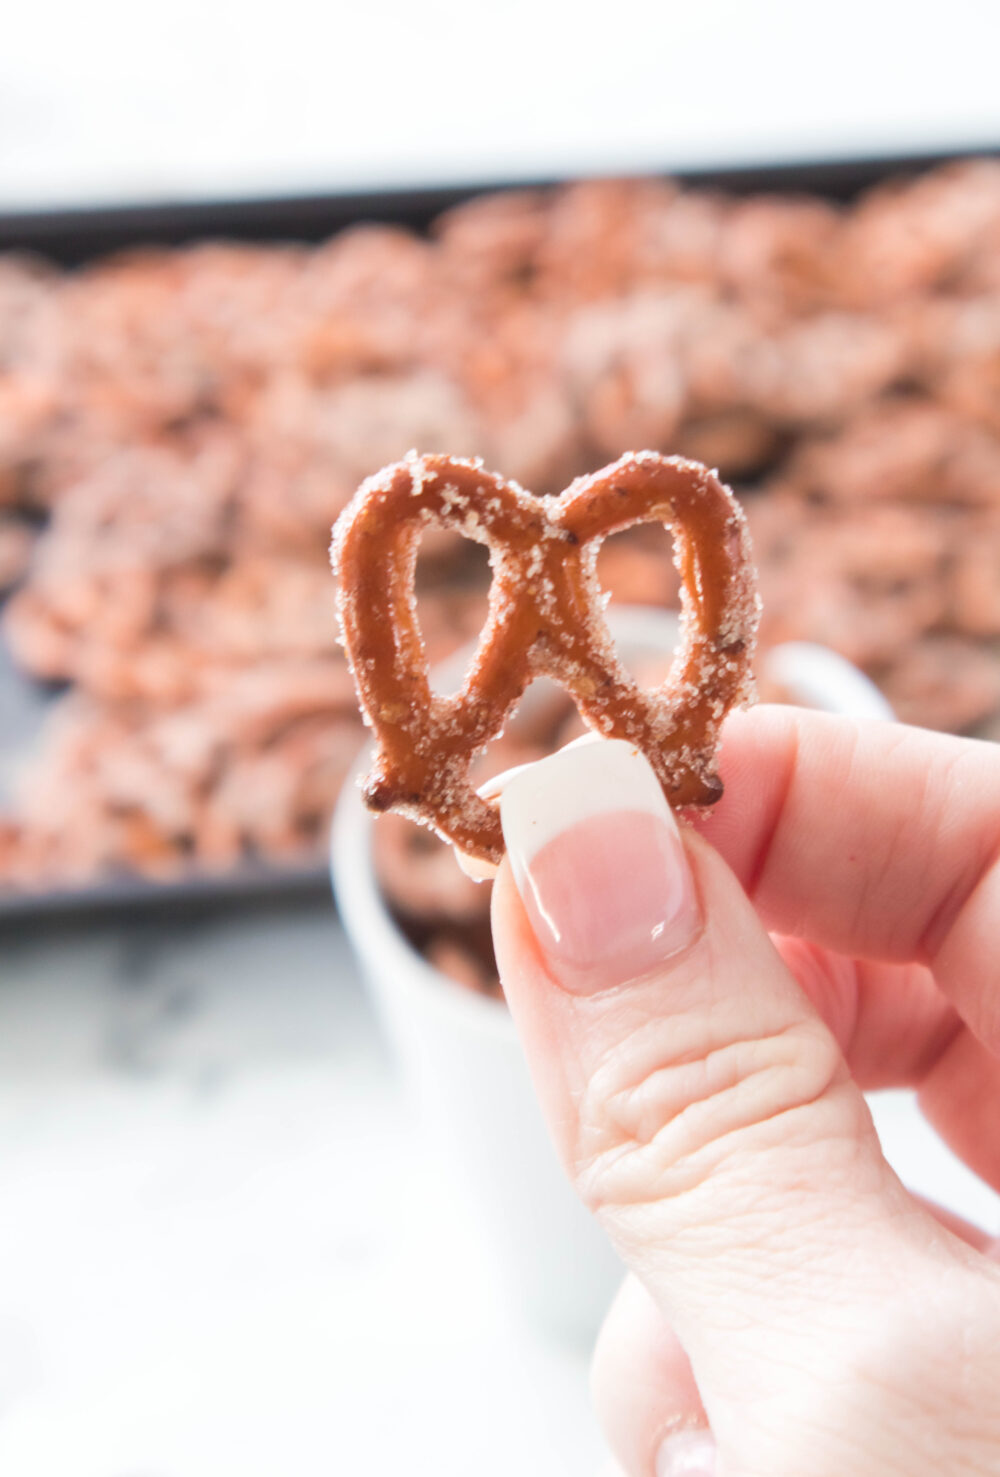 hand holding cinnamon pretzel with baking sheet full of cinnamon pretzels in the background